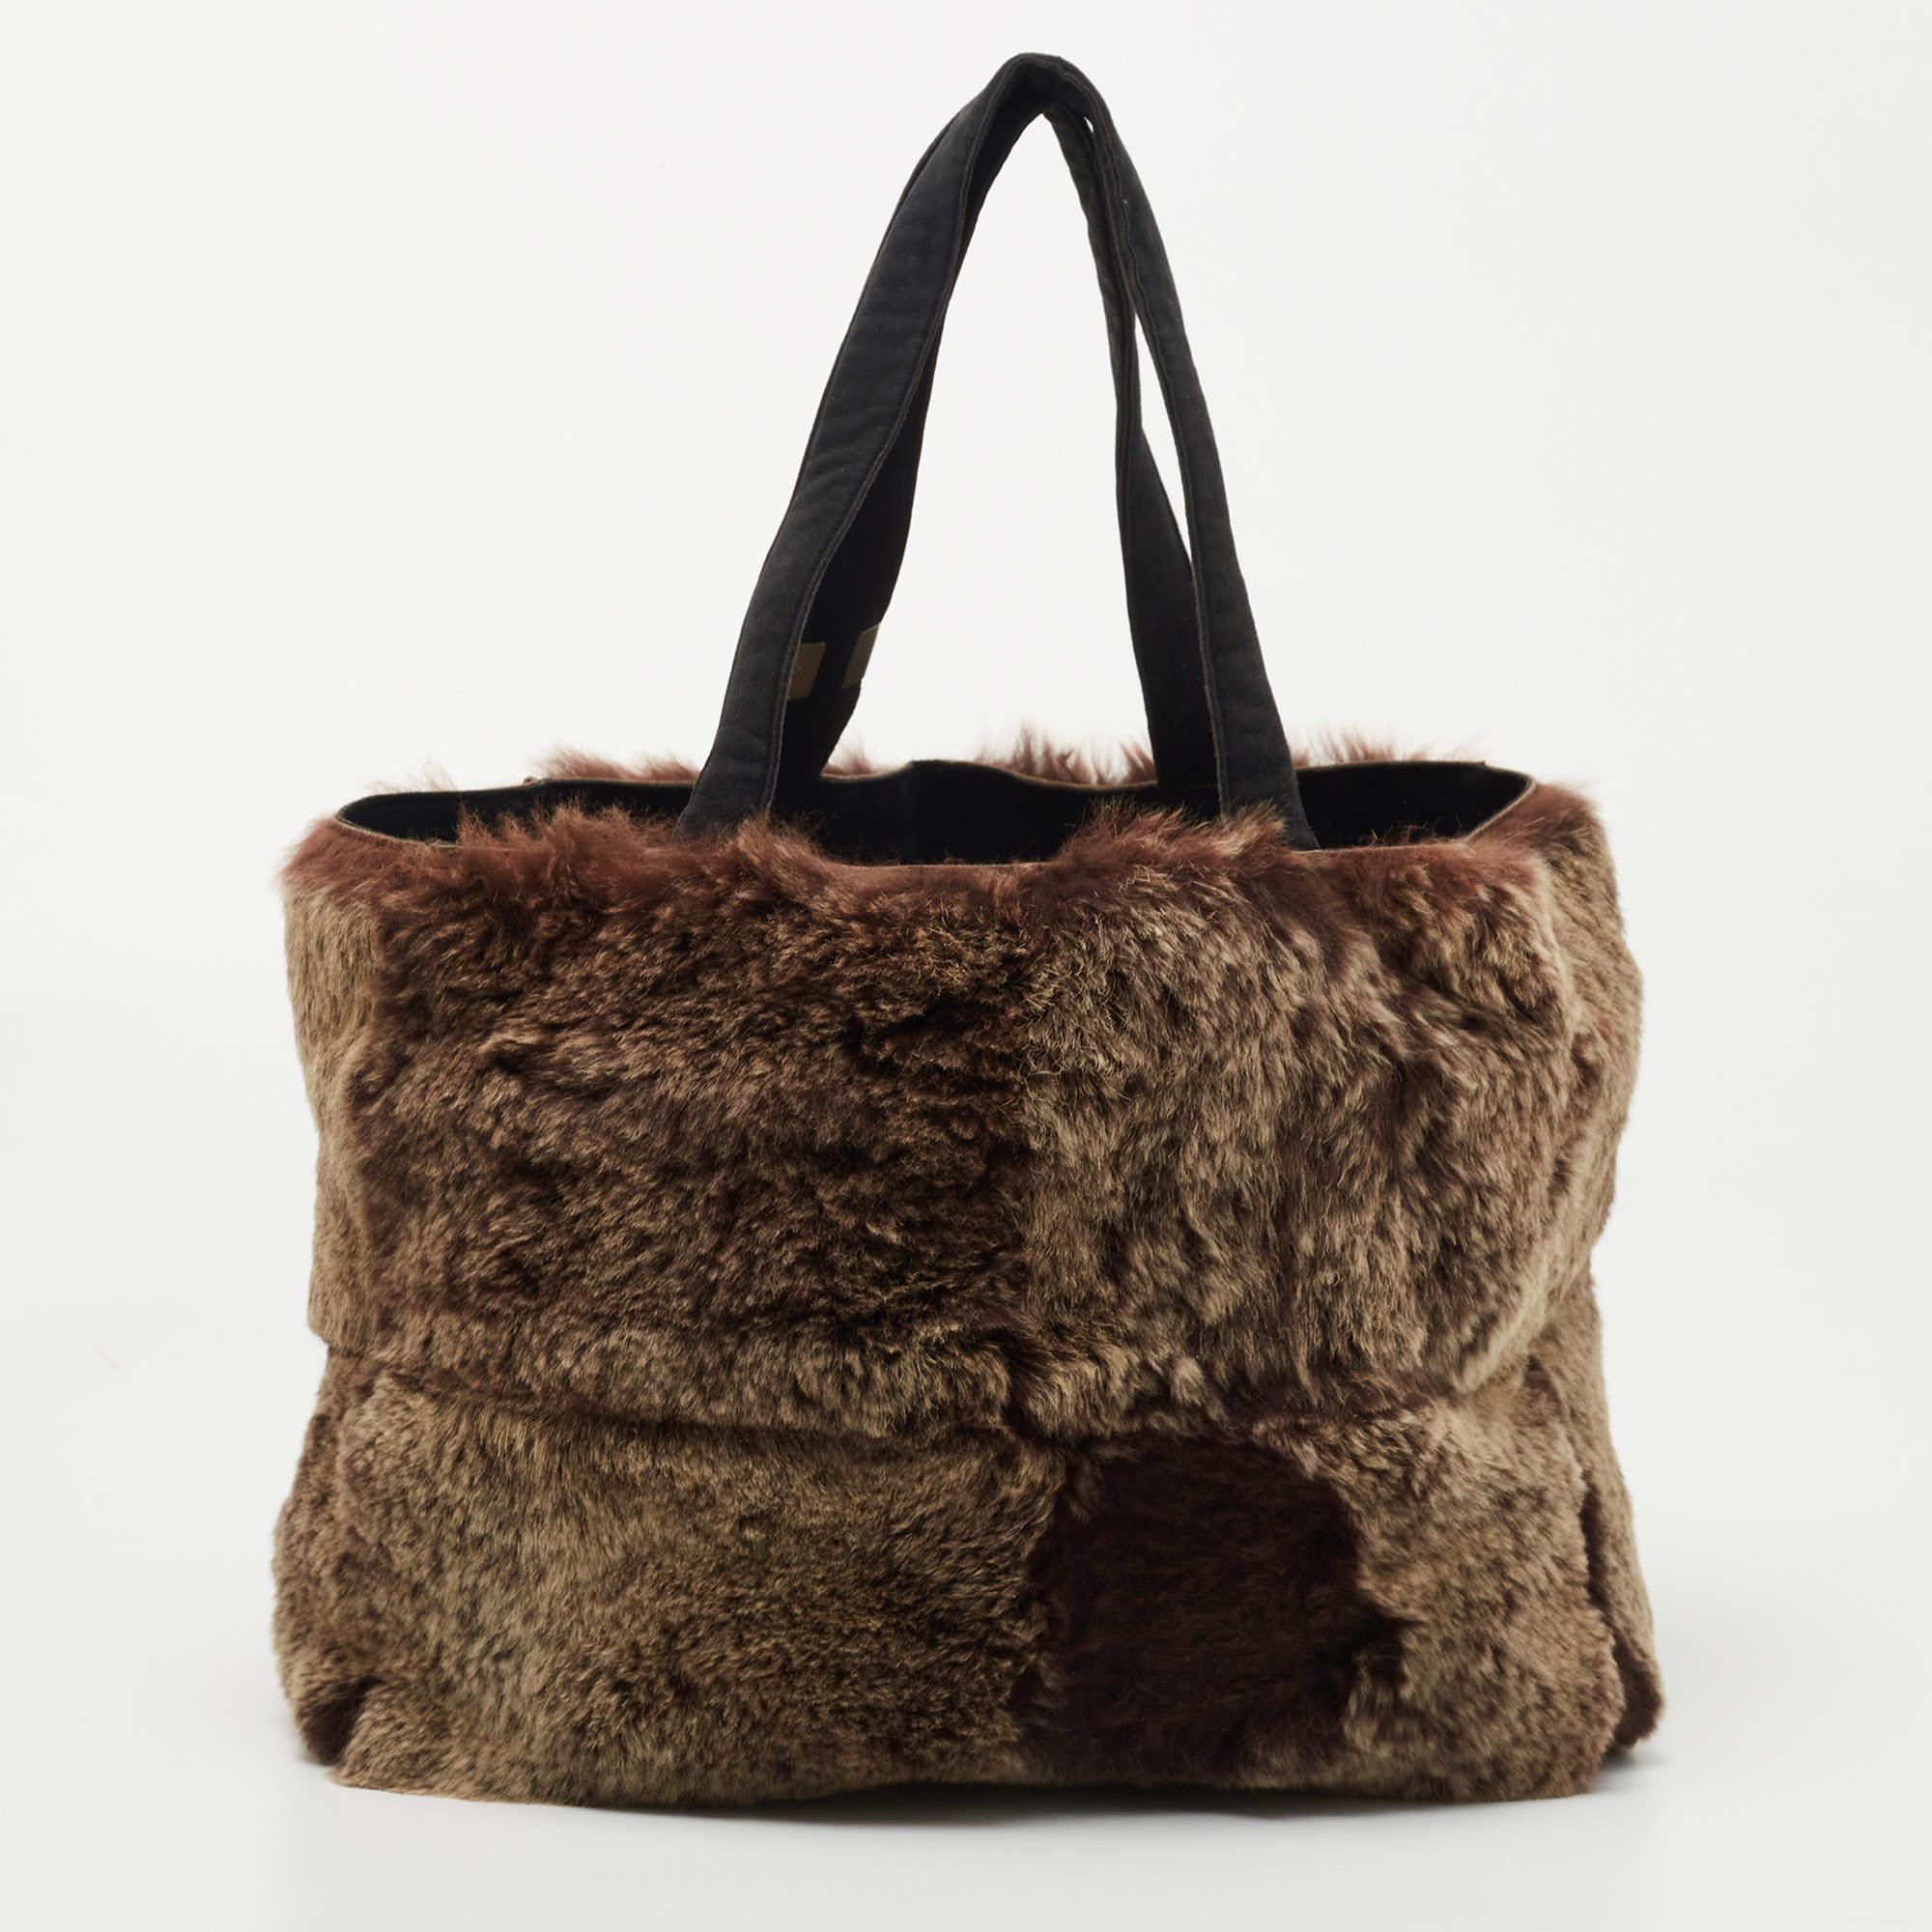 Carry everything you need in style thanks to this authentic Chanel tote. Crafted from rabbit fur and suede, it features flat handles and a nylon-lined interior.

